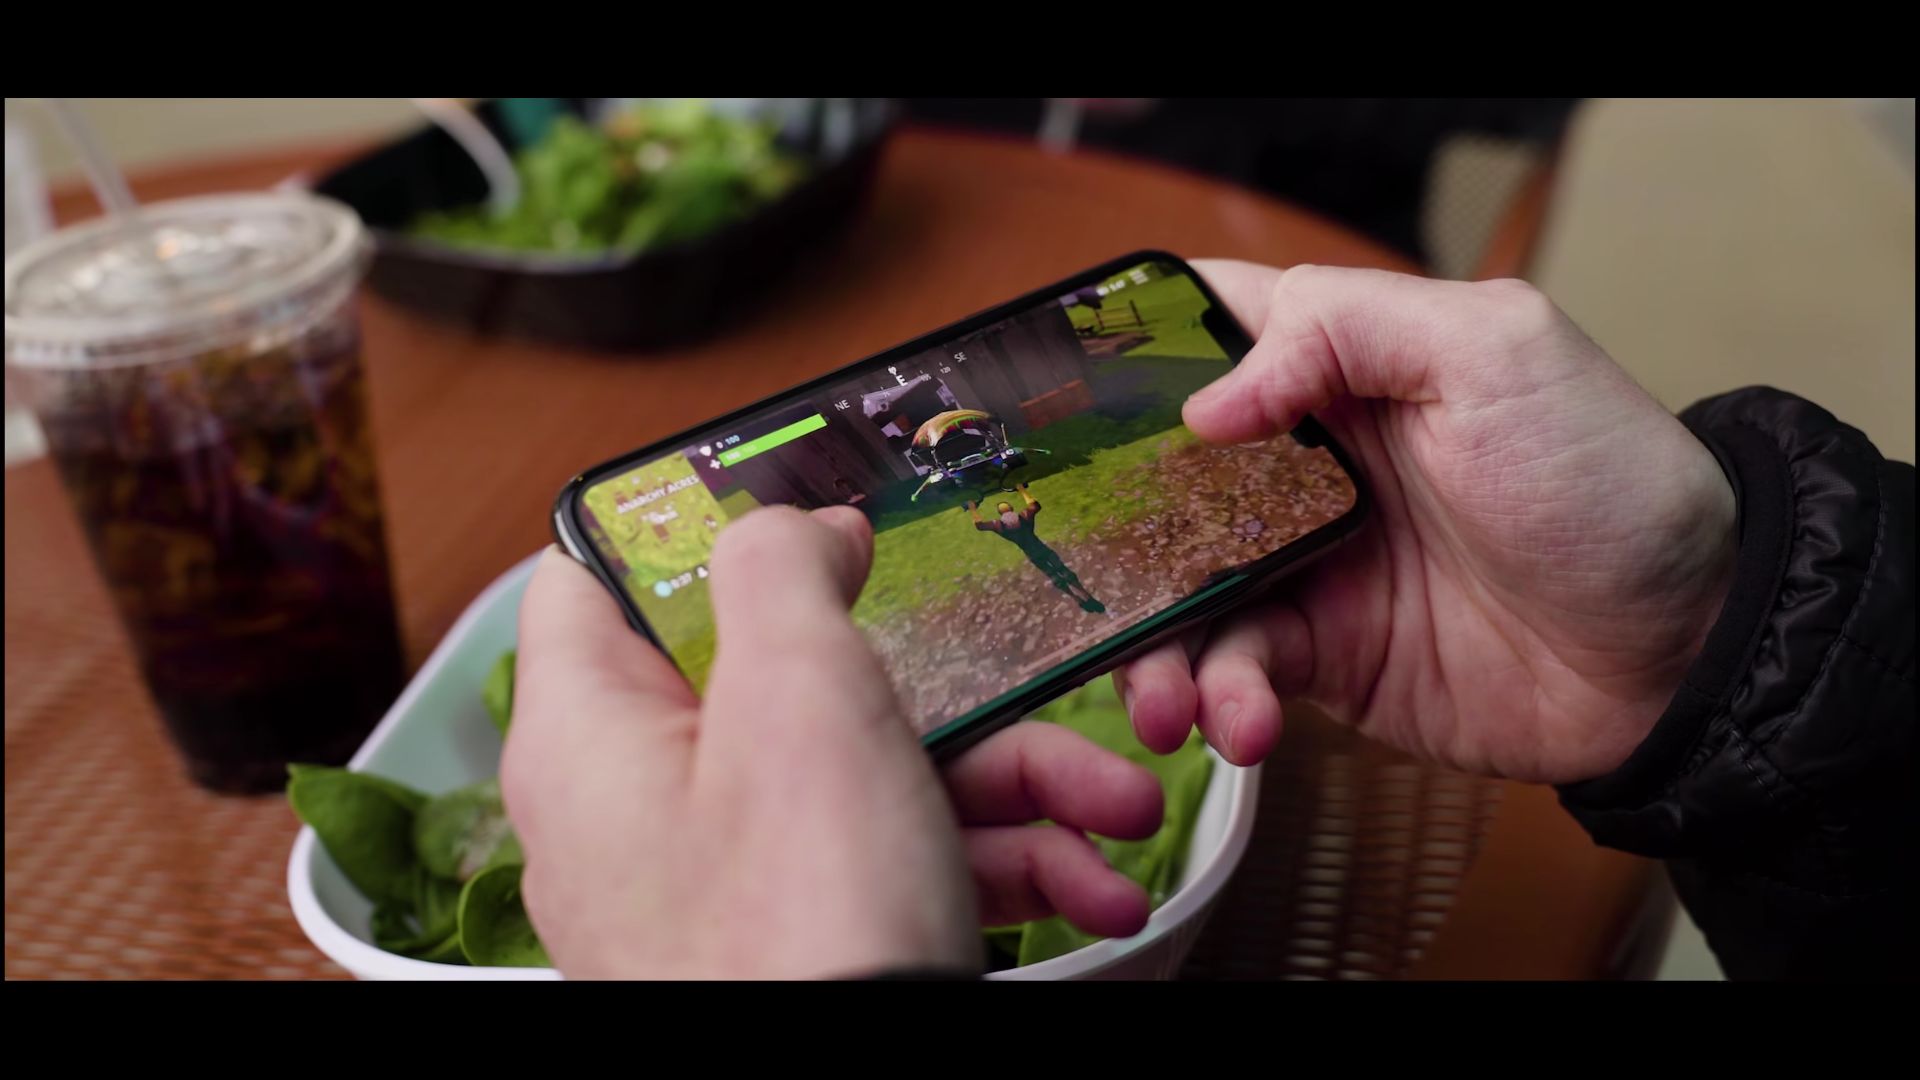 Fortnite Mobile Outlines Pending Updates and Android ... - 1920 x 1080 png 2556kB